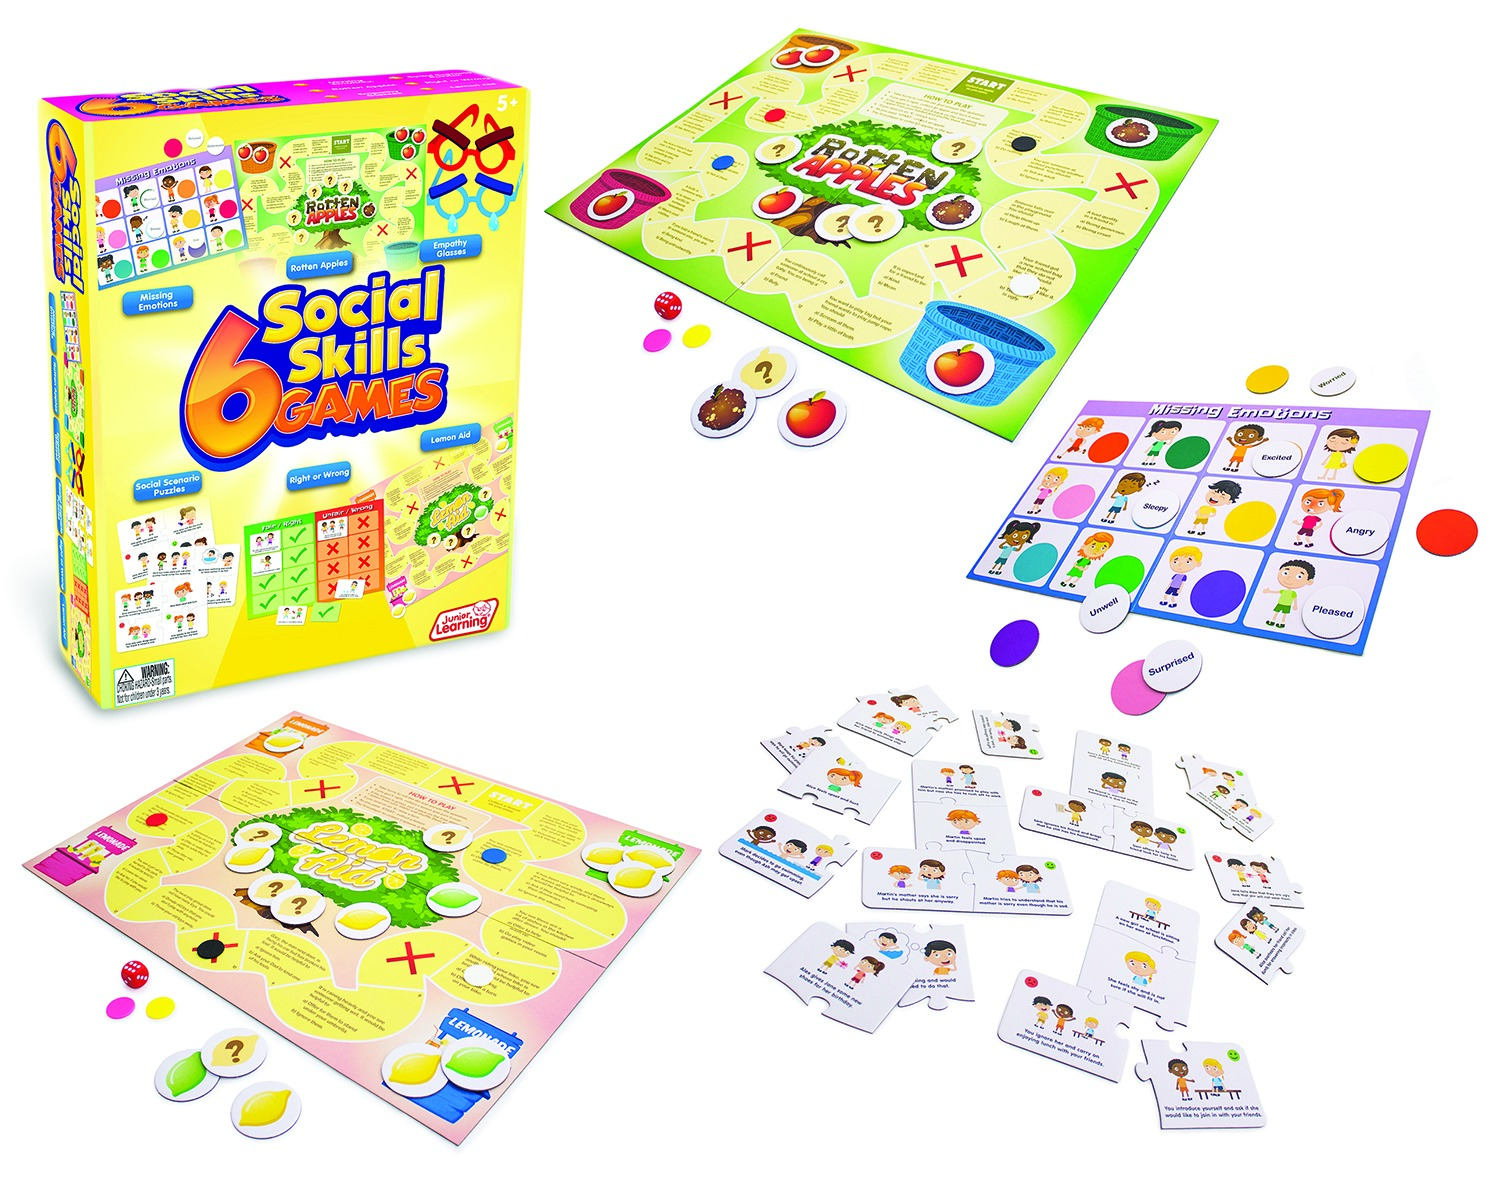 8 Games To Use In The Social Studies Classroom - Brainy Apples